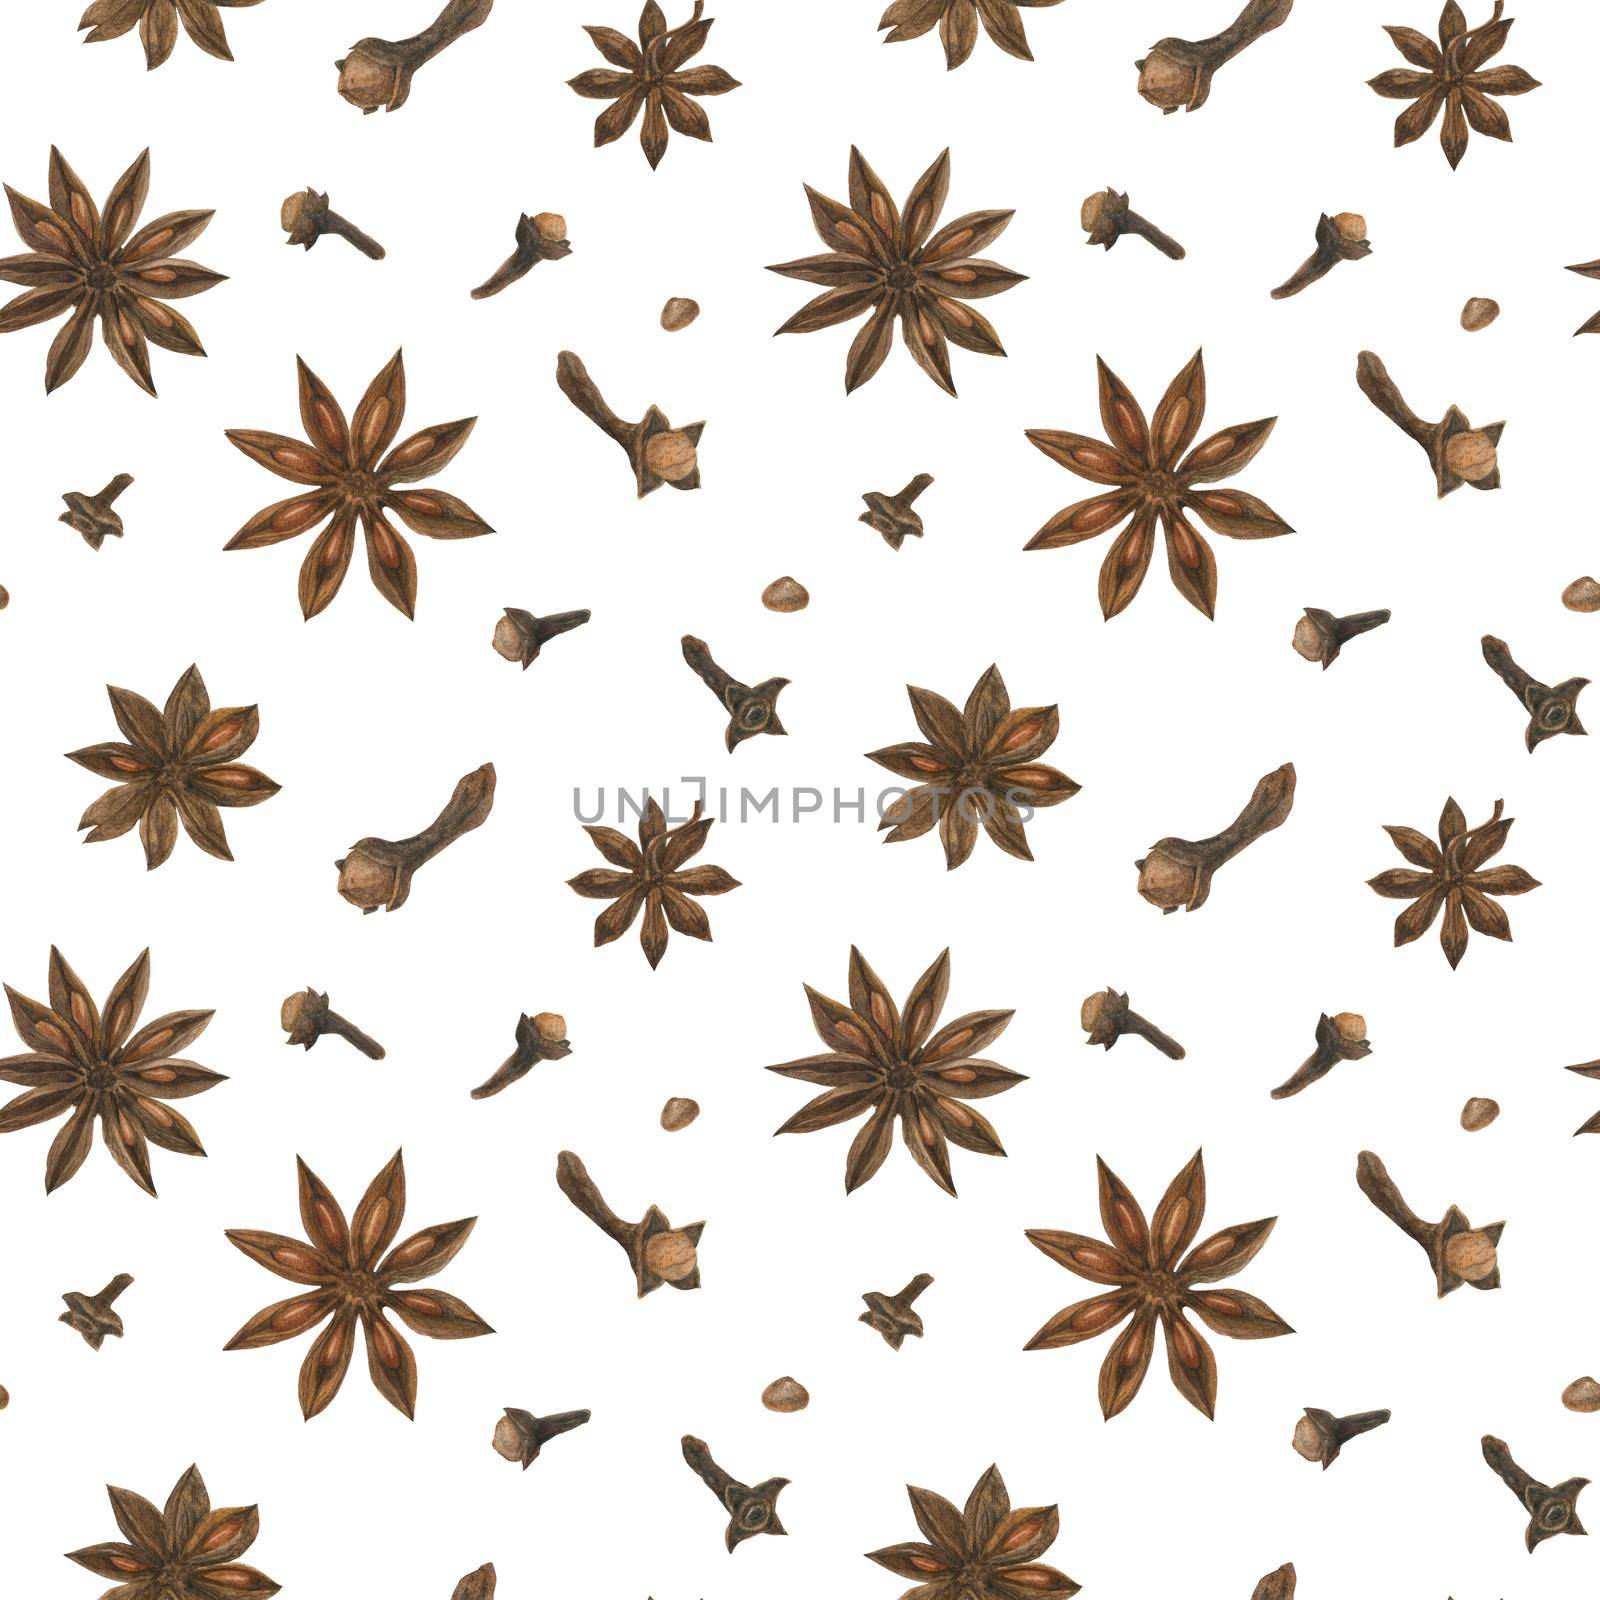 Dried clove and star anise white seamless pattern by Xeniasnowstorm